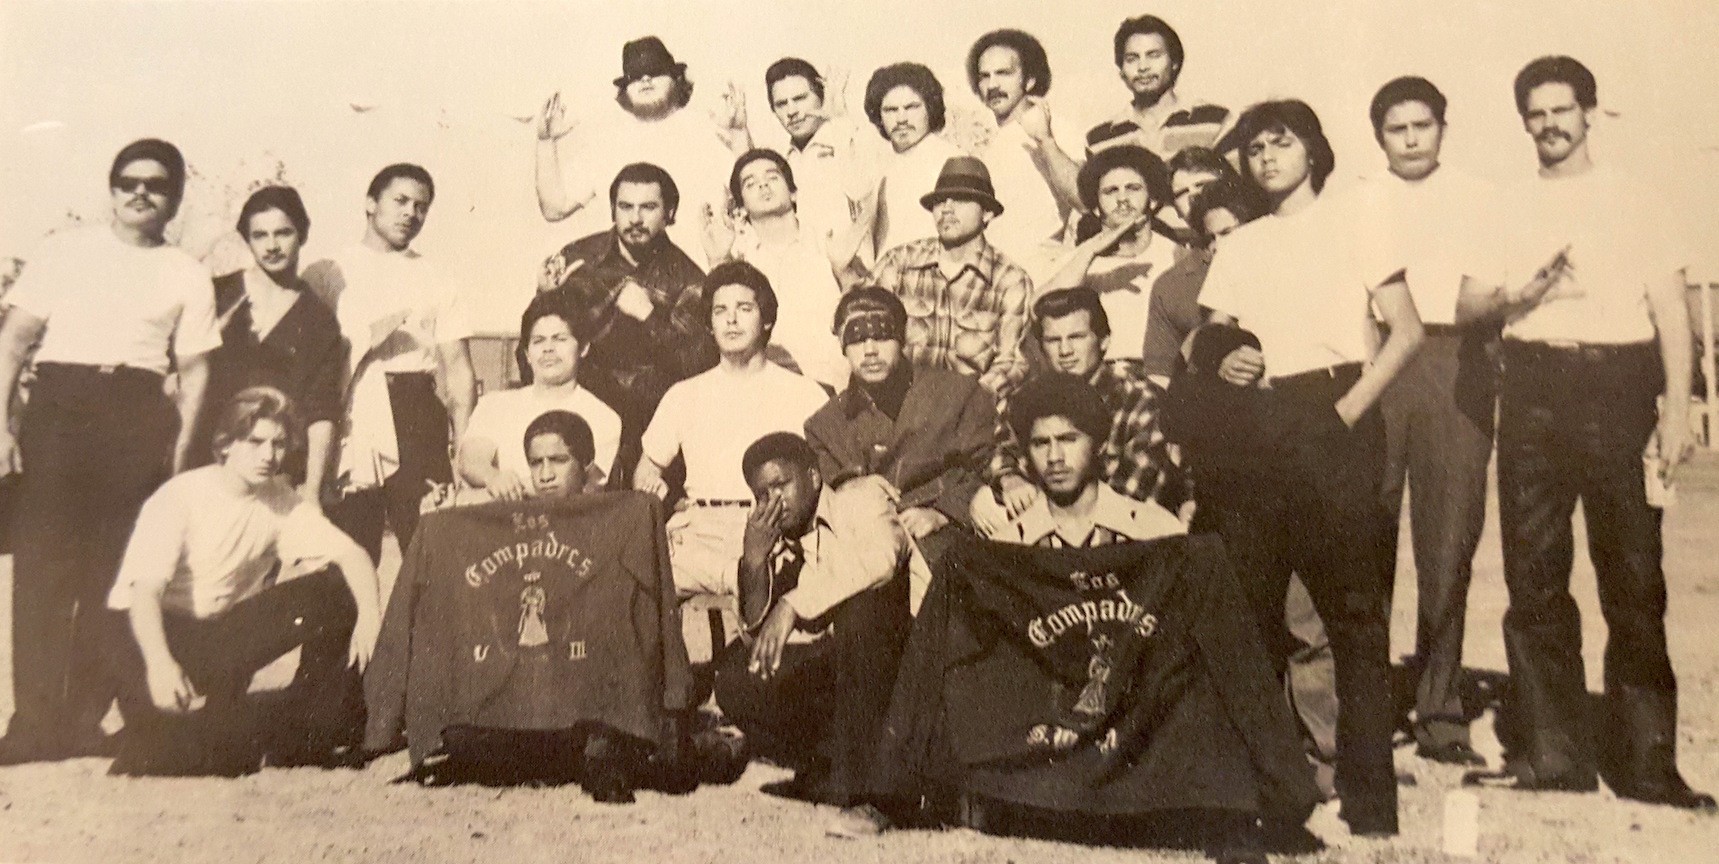 Male members of Marianne's gang, Las compadres. Photo credit: Lowrider Magazine. Photo courtesy of Marianne Diaz.